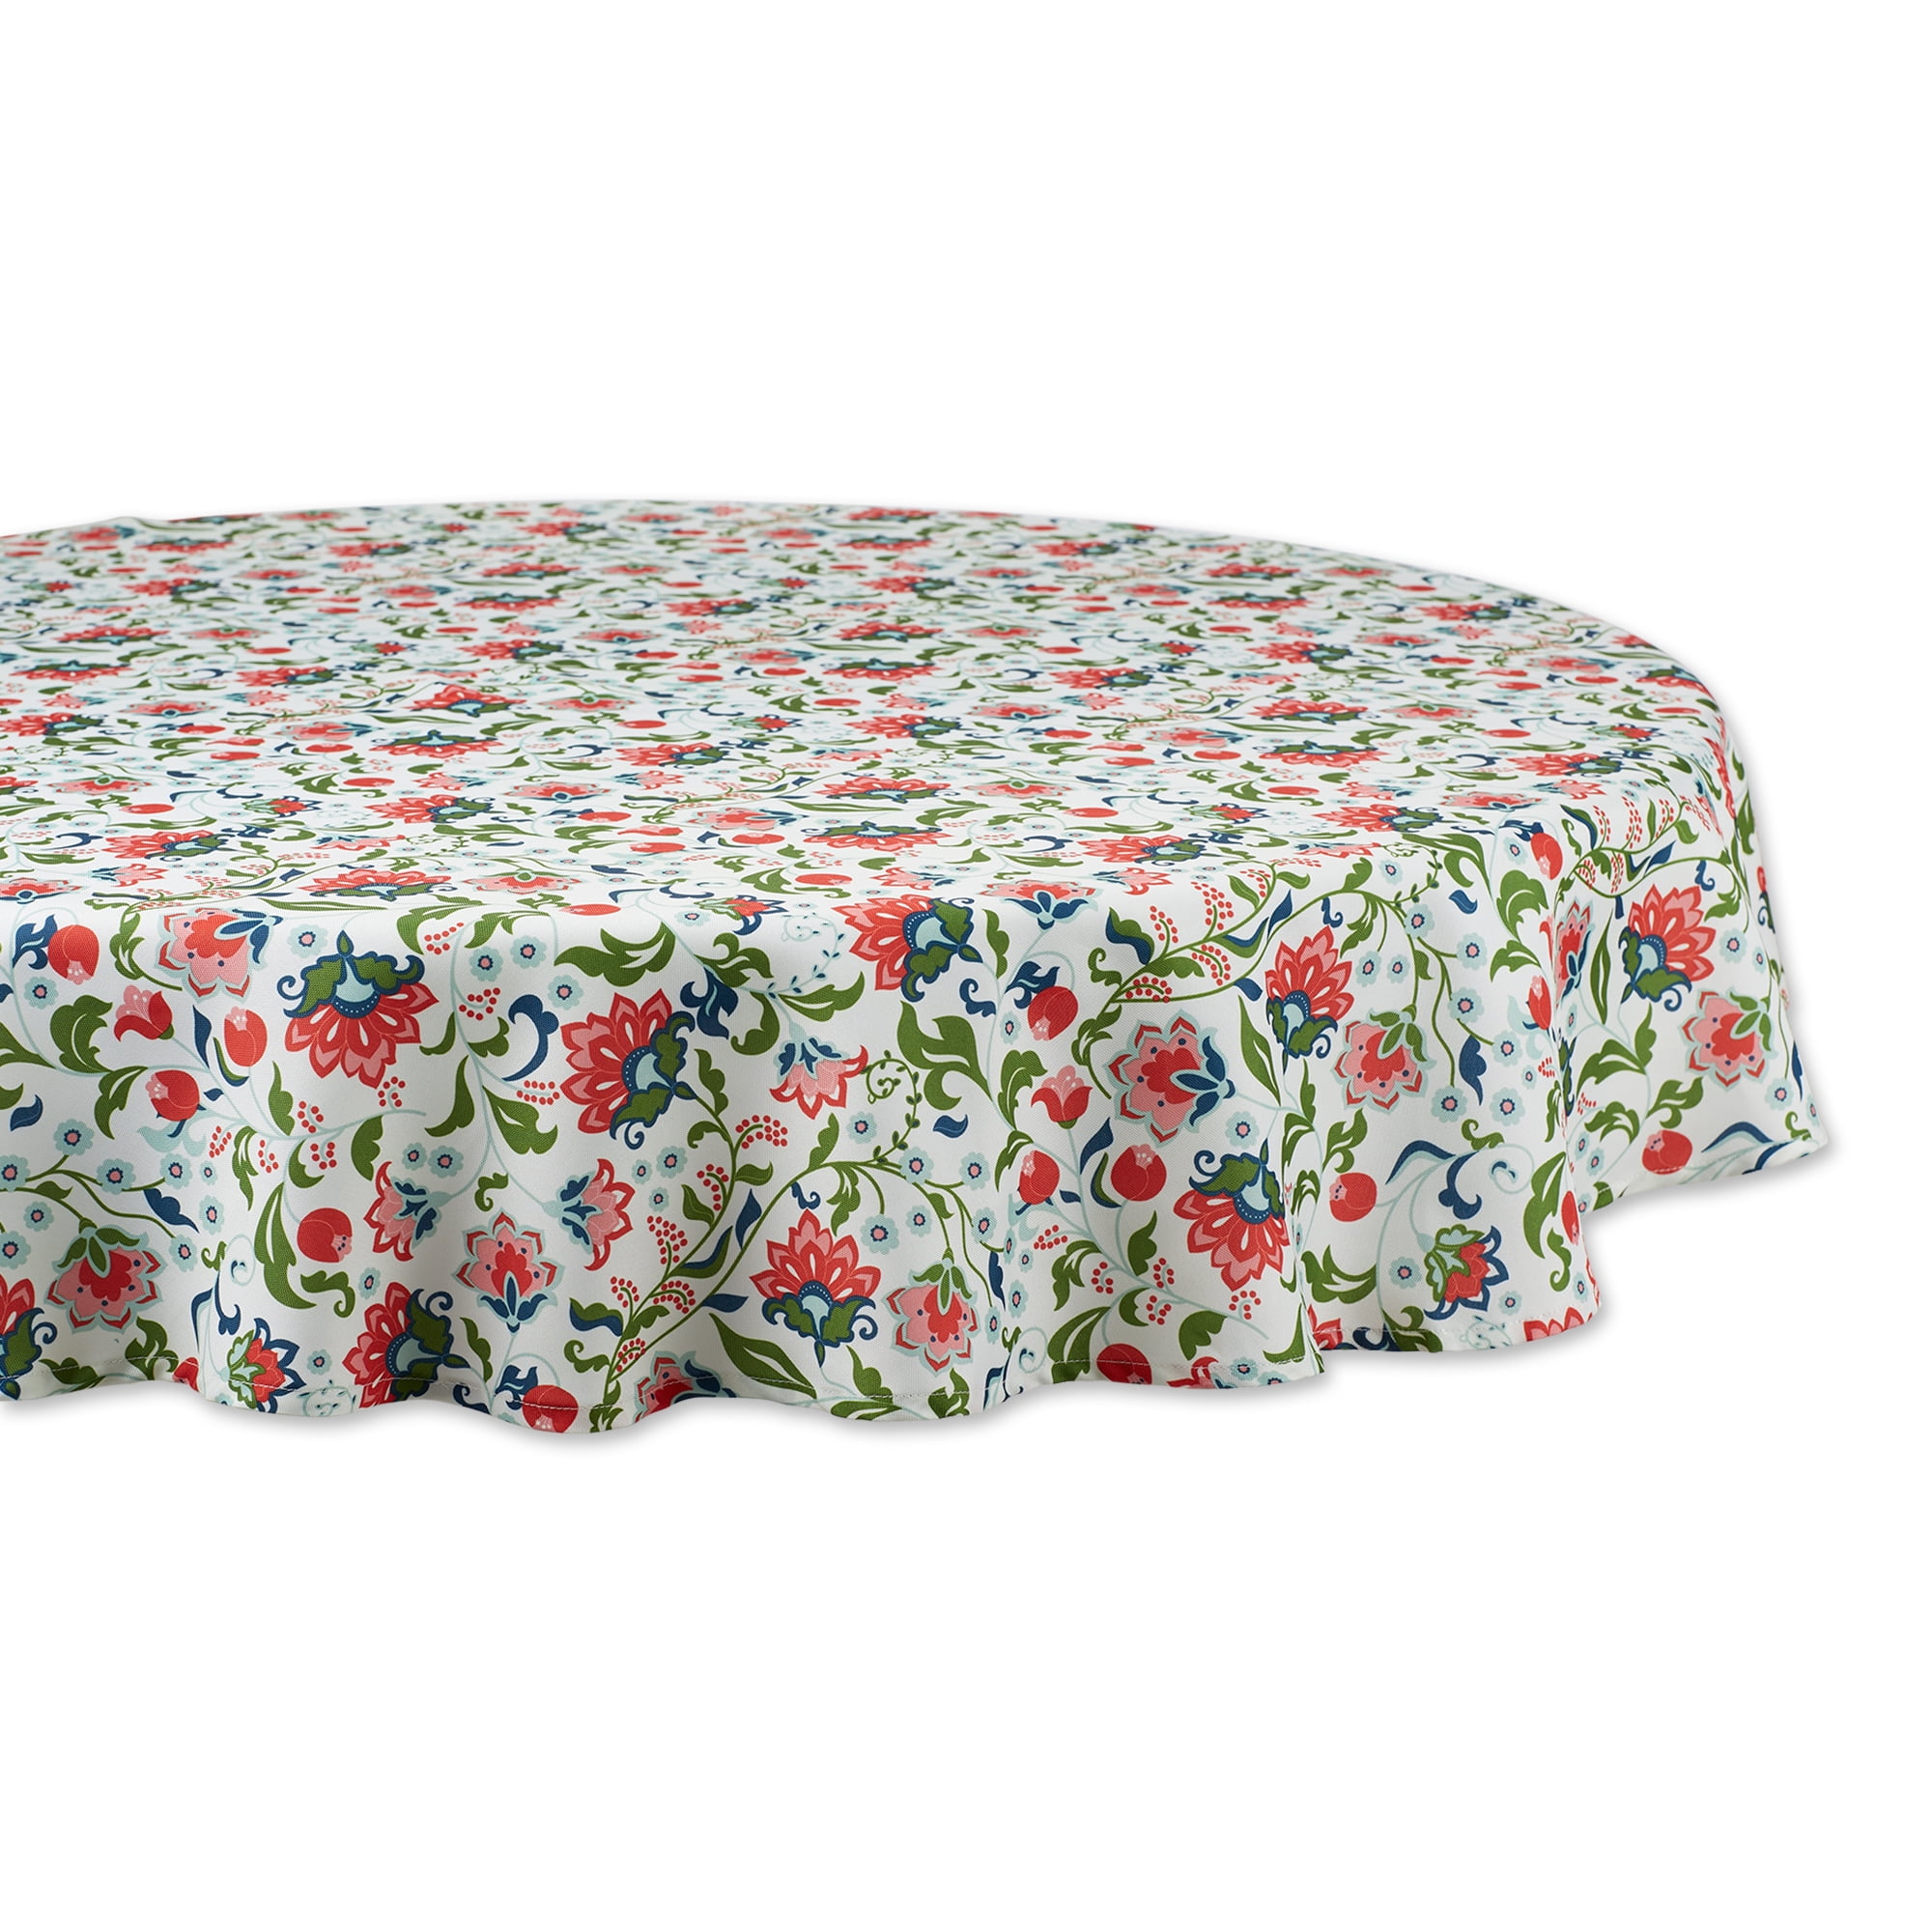 Assorted Sizes! Geometric Floral Signature Tablecloths 